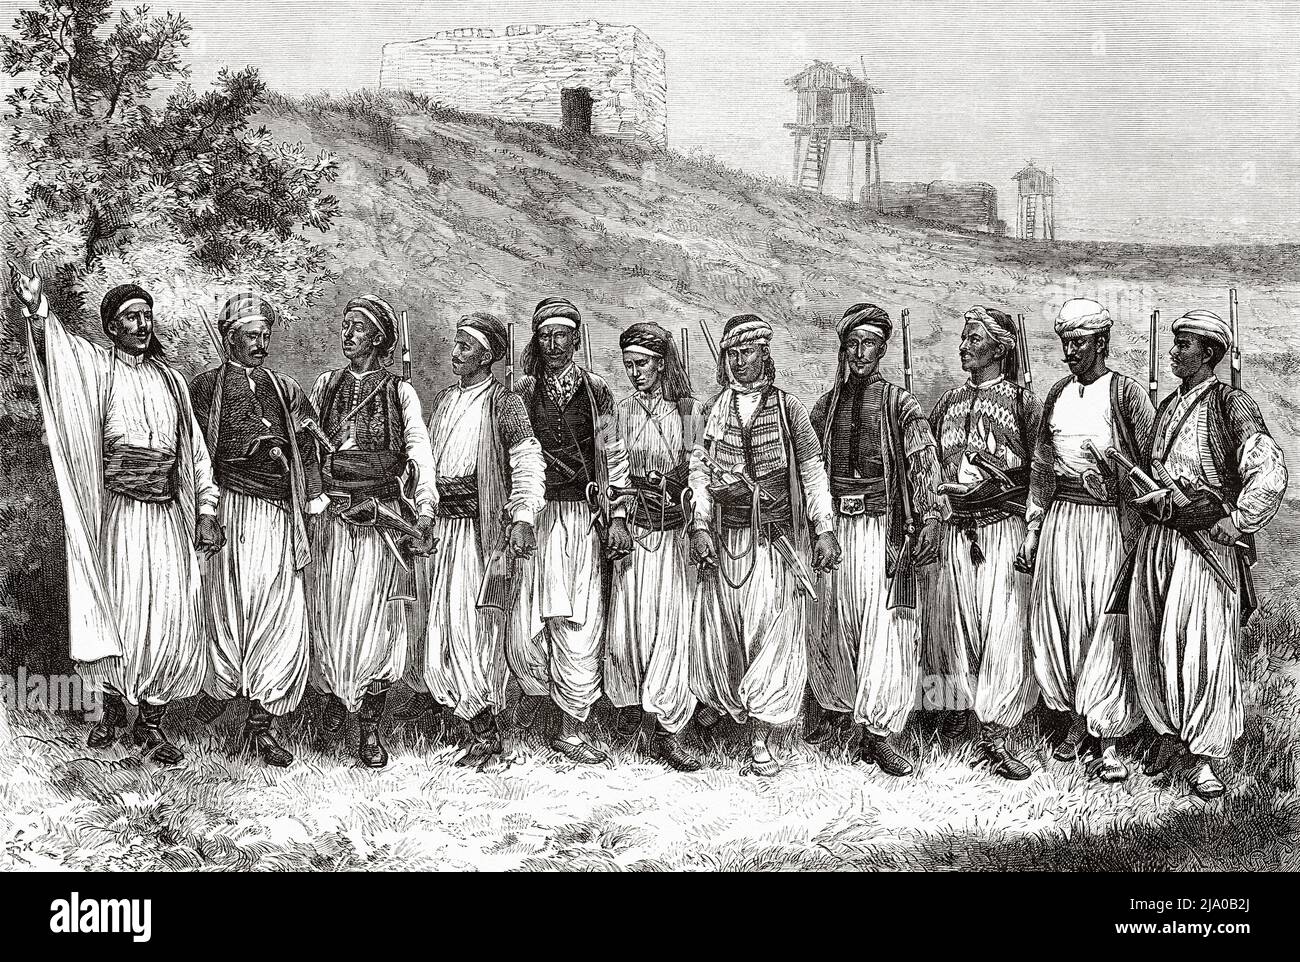 The traditional dance of the Nusayris Arab community, Nusayriyah Mountains. Syria, Middle East. The Nusayris by Léon Cahun 1878. Le Tour du Monde 1879 Stock Photo